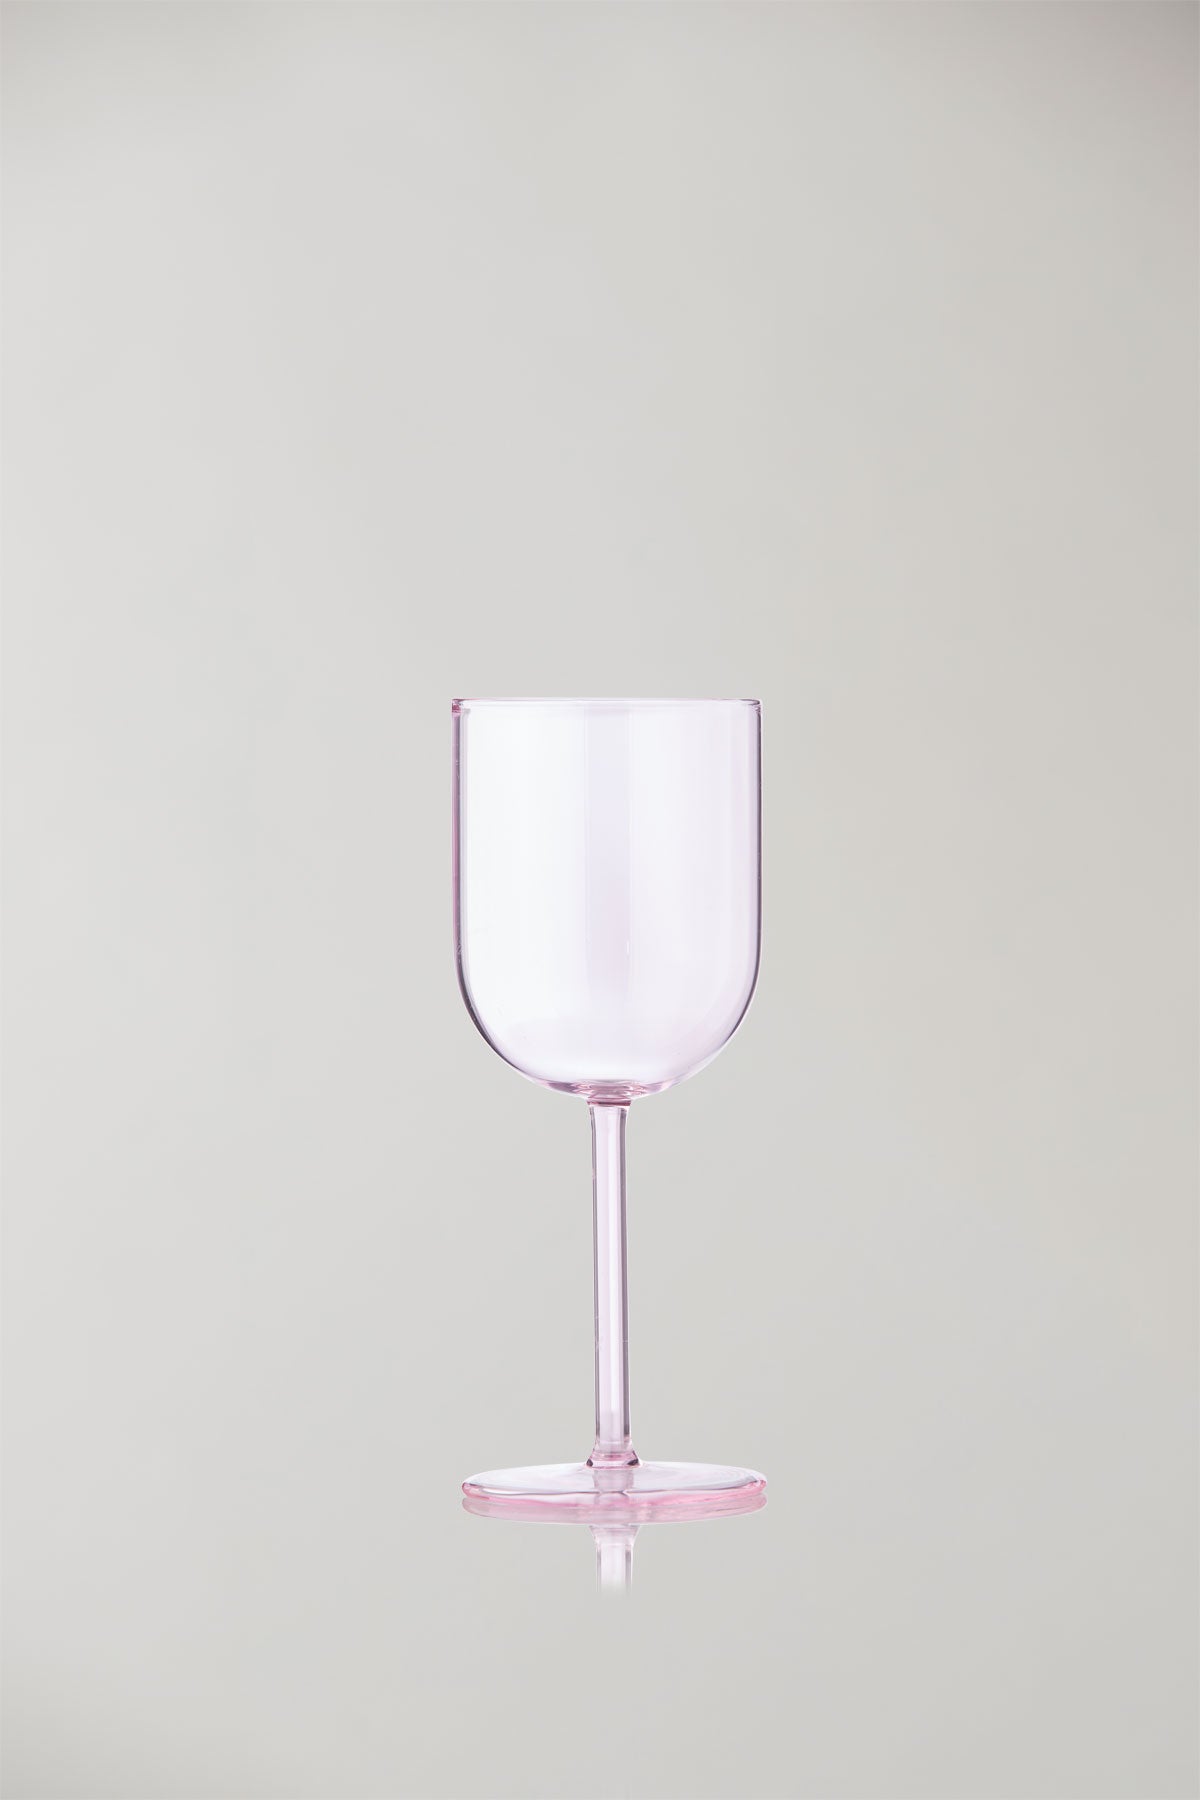 Glassware Tagged "Rosa" - About